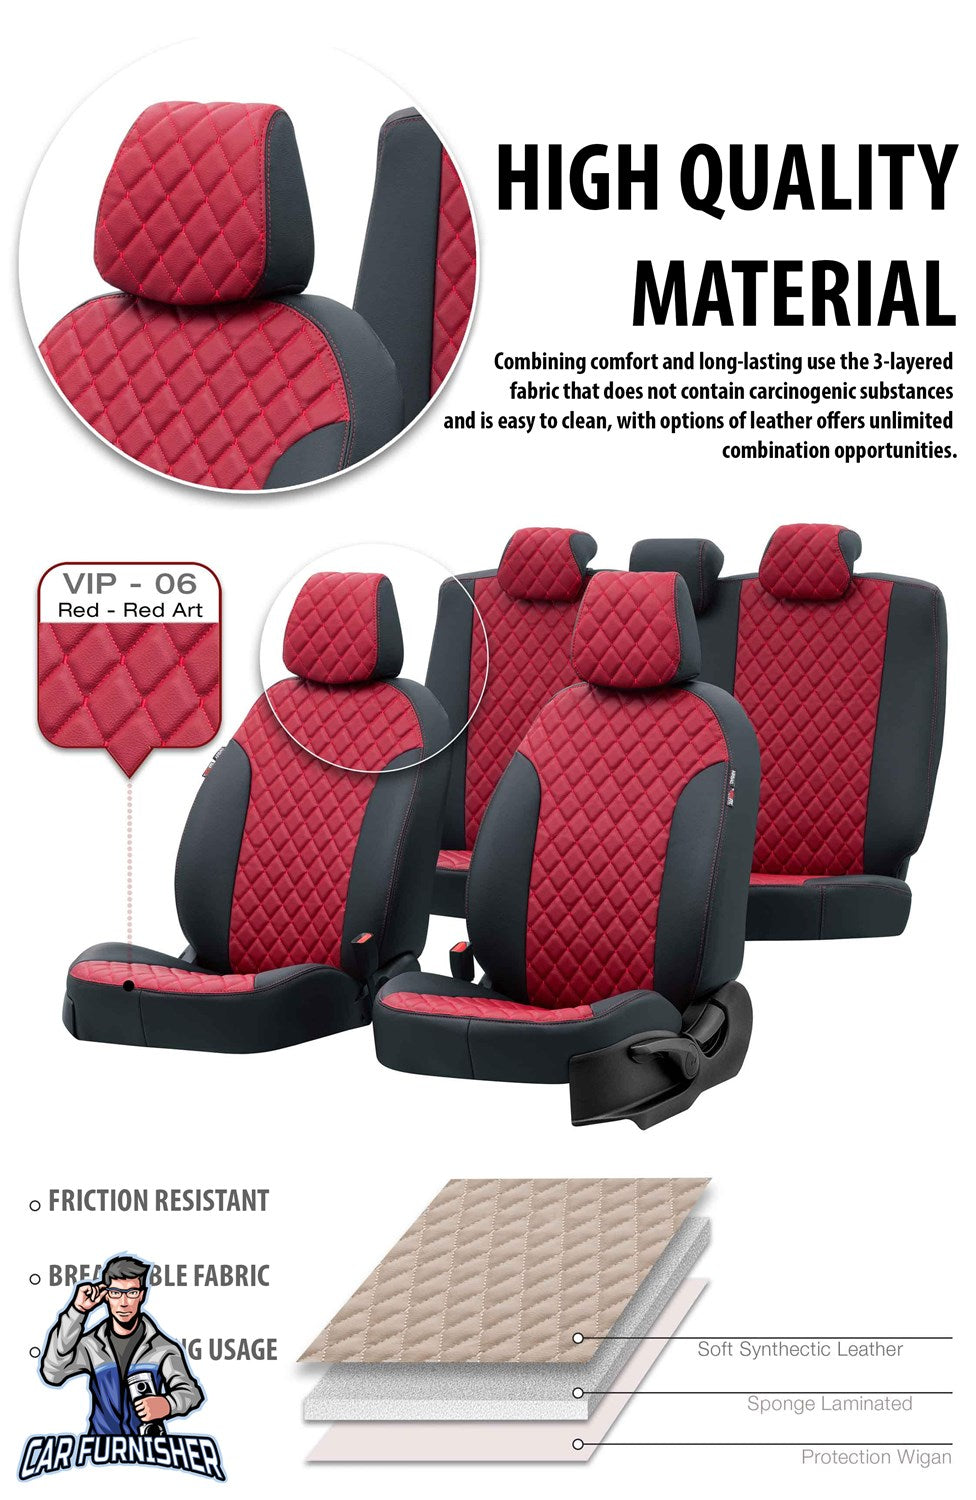 Seat Altea Seat Covers Madrid Leather Design Smoked Leather